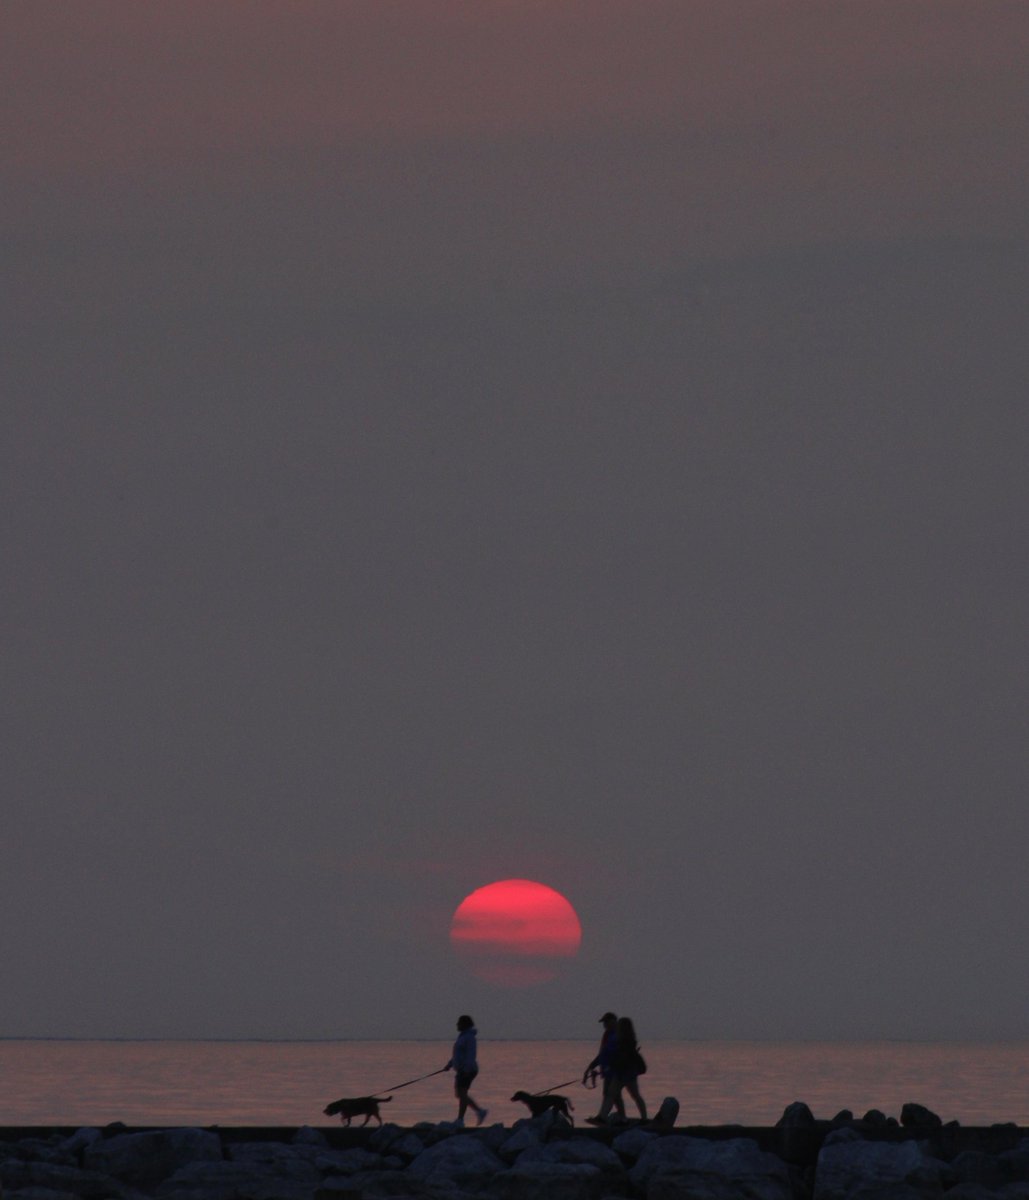 Last summer in Petoskey. 

#summer #summersunset #redrubberball #silhouette #dogs #latergram #michiganphotographer #petoskey #petoskeymichigan #lakemichigan #lakemichigansunset #greatlakesstate #hazy #lastsummer #dreamingofsummer #fromthearchives #rightplacerighttime #canon